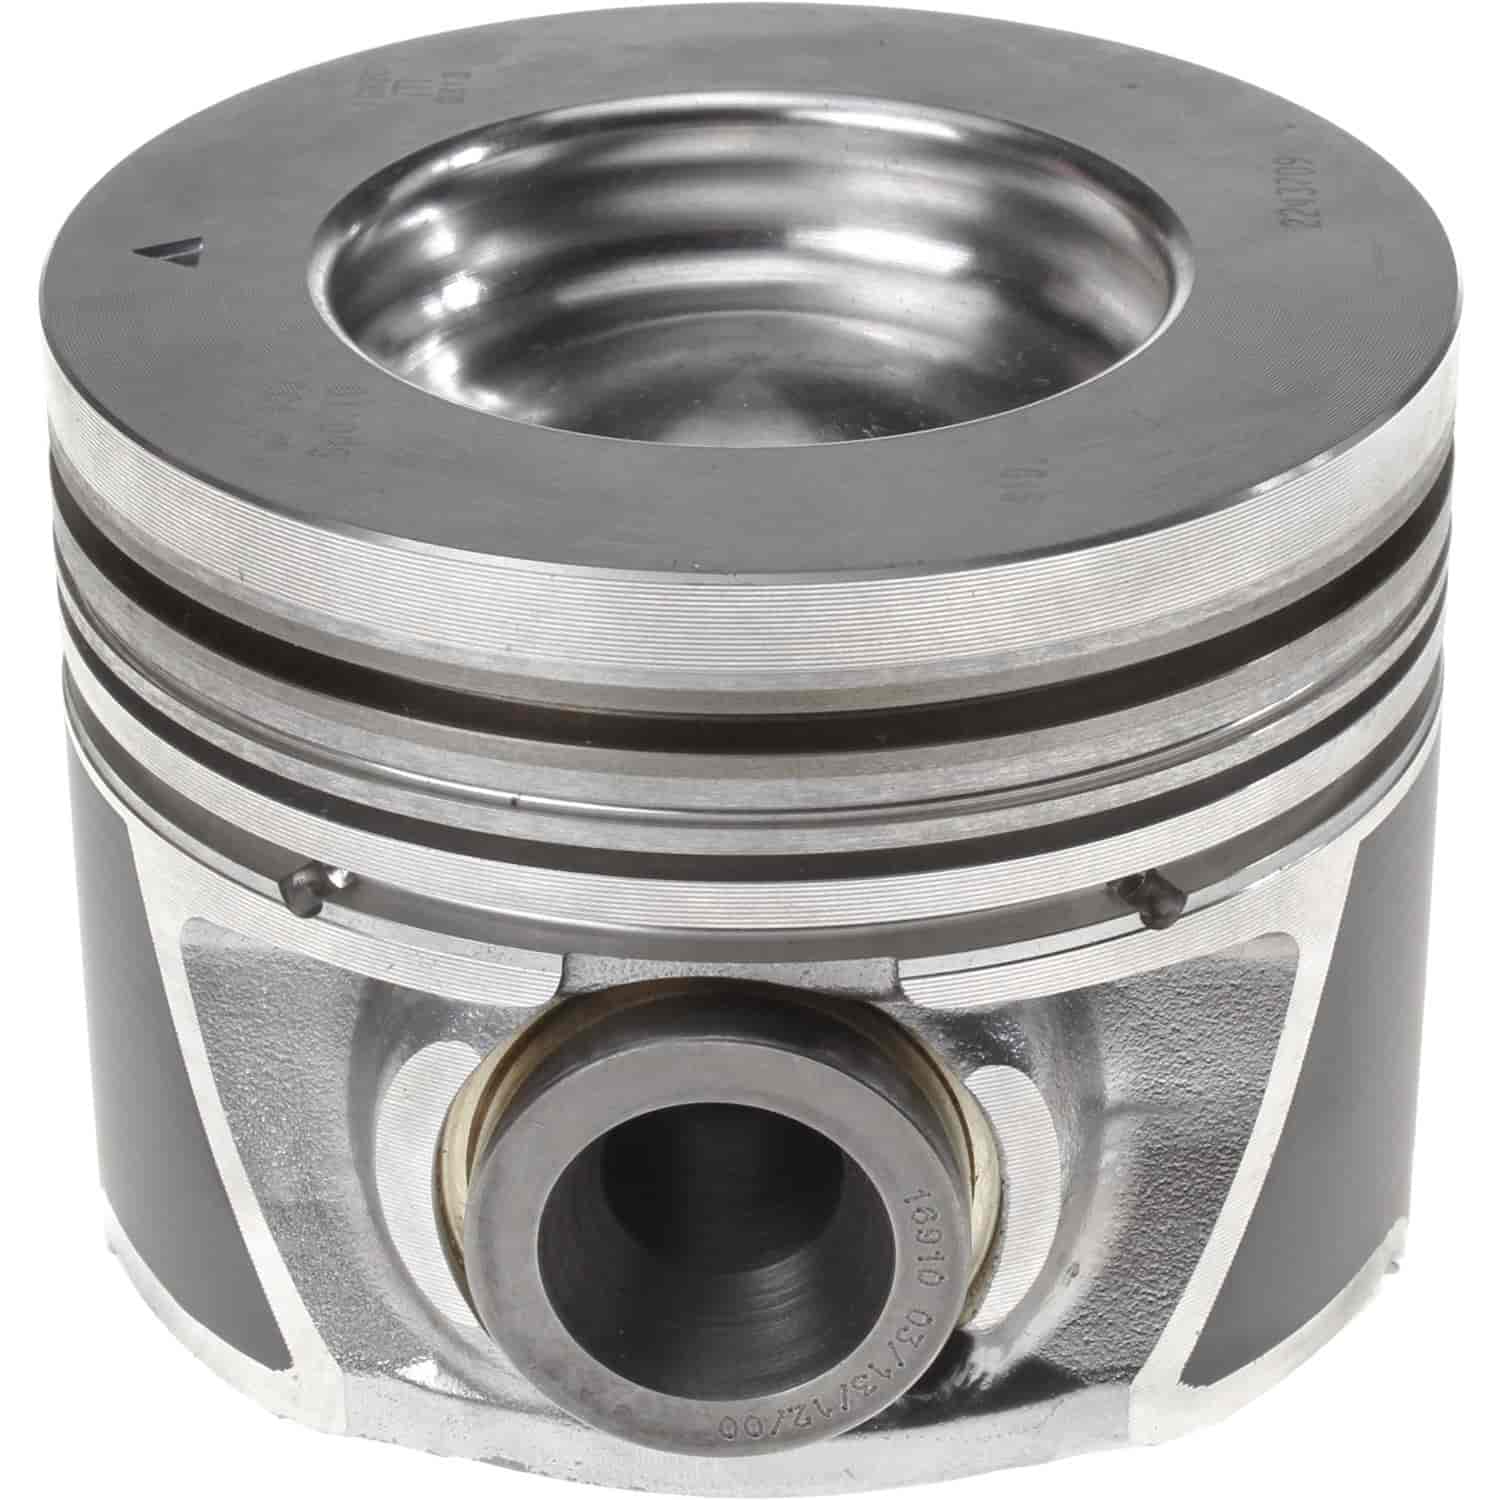 Piston 2006-2010 Chevy/GMC Duramax Diesel V8 6.6L Left Bank with 4.055" Bore (Standard)